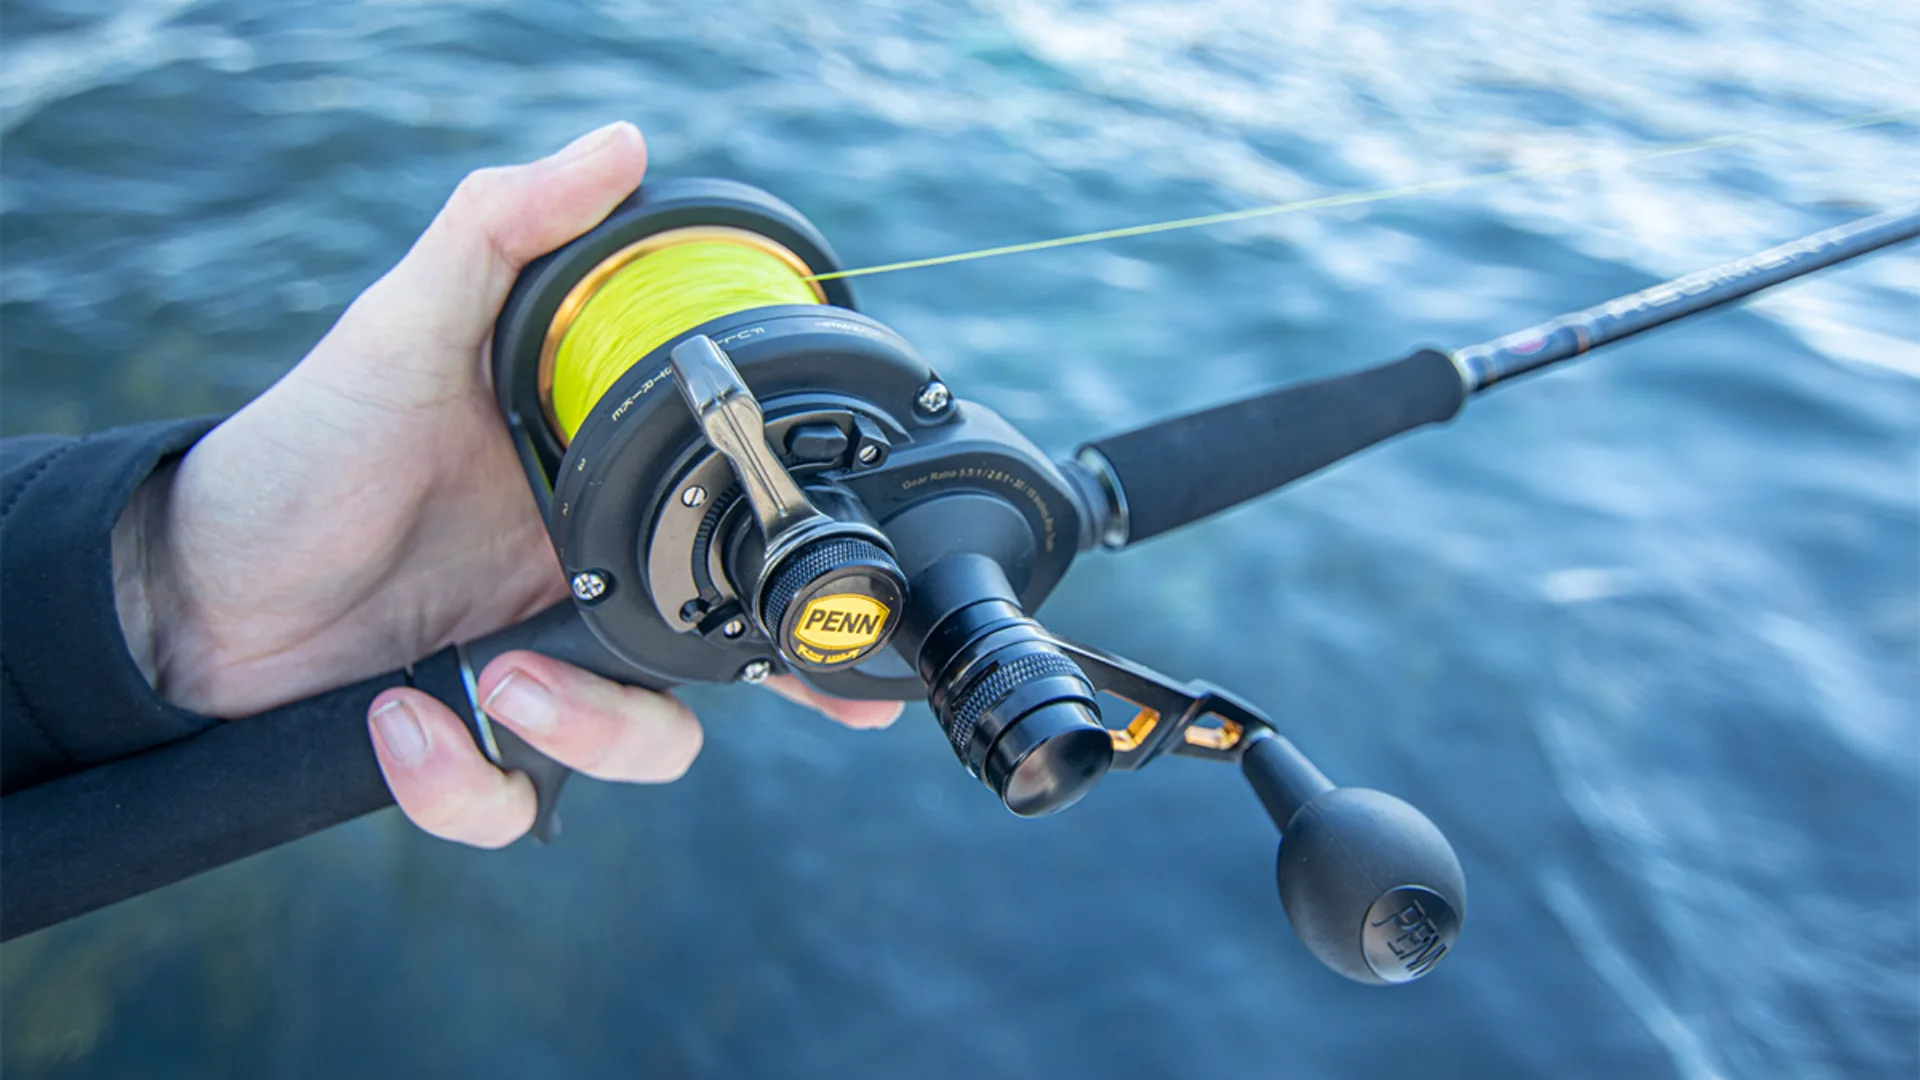 Penn Squall Lever Drag Conventional Trolling Reel